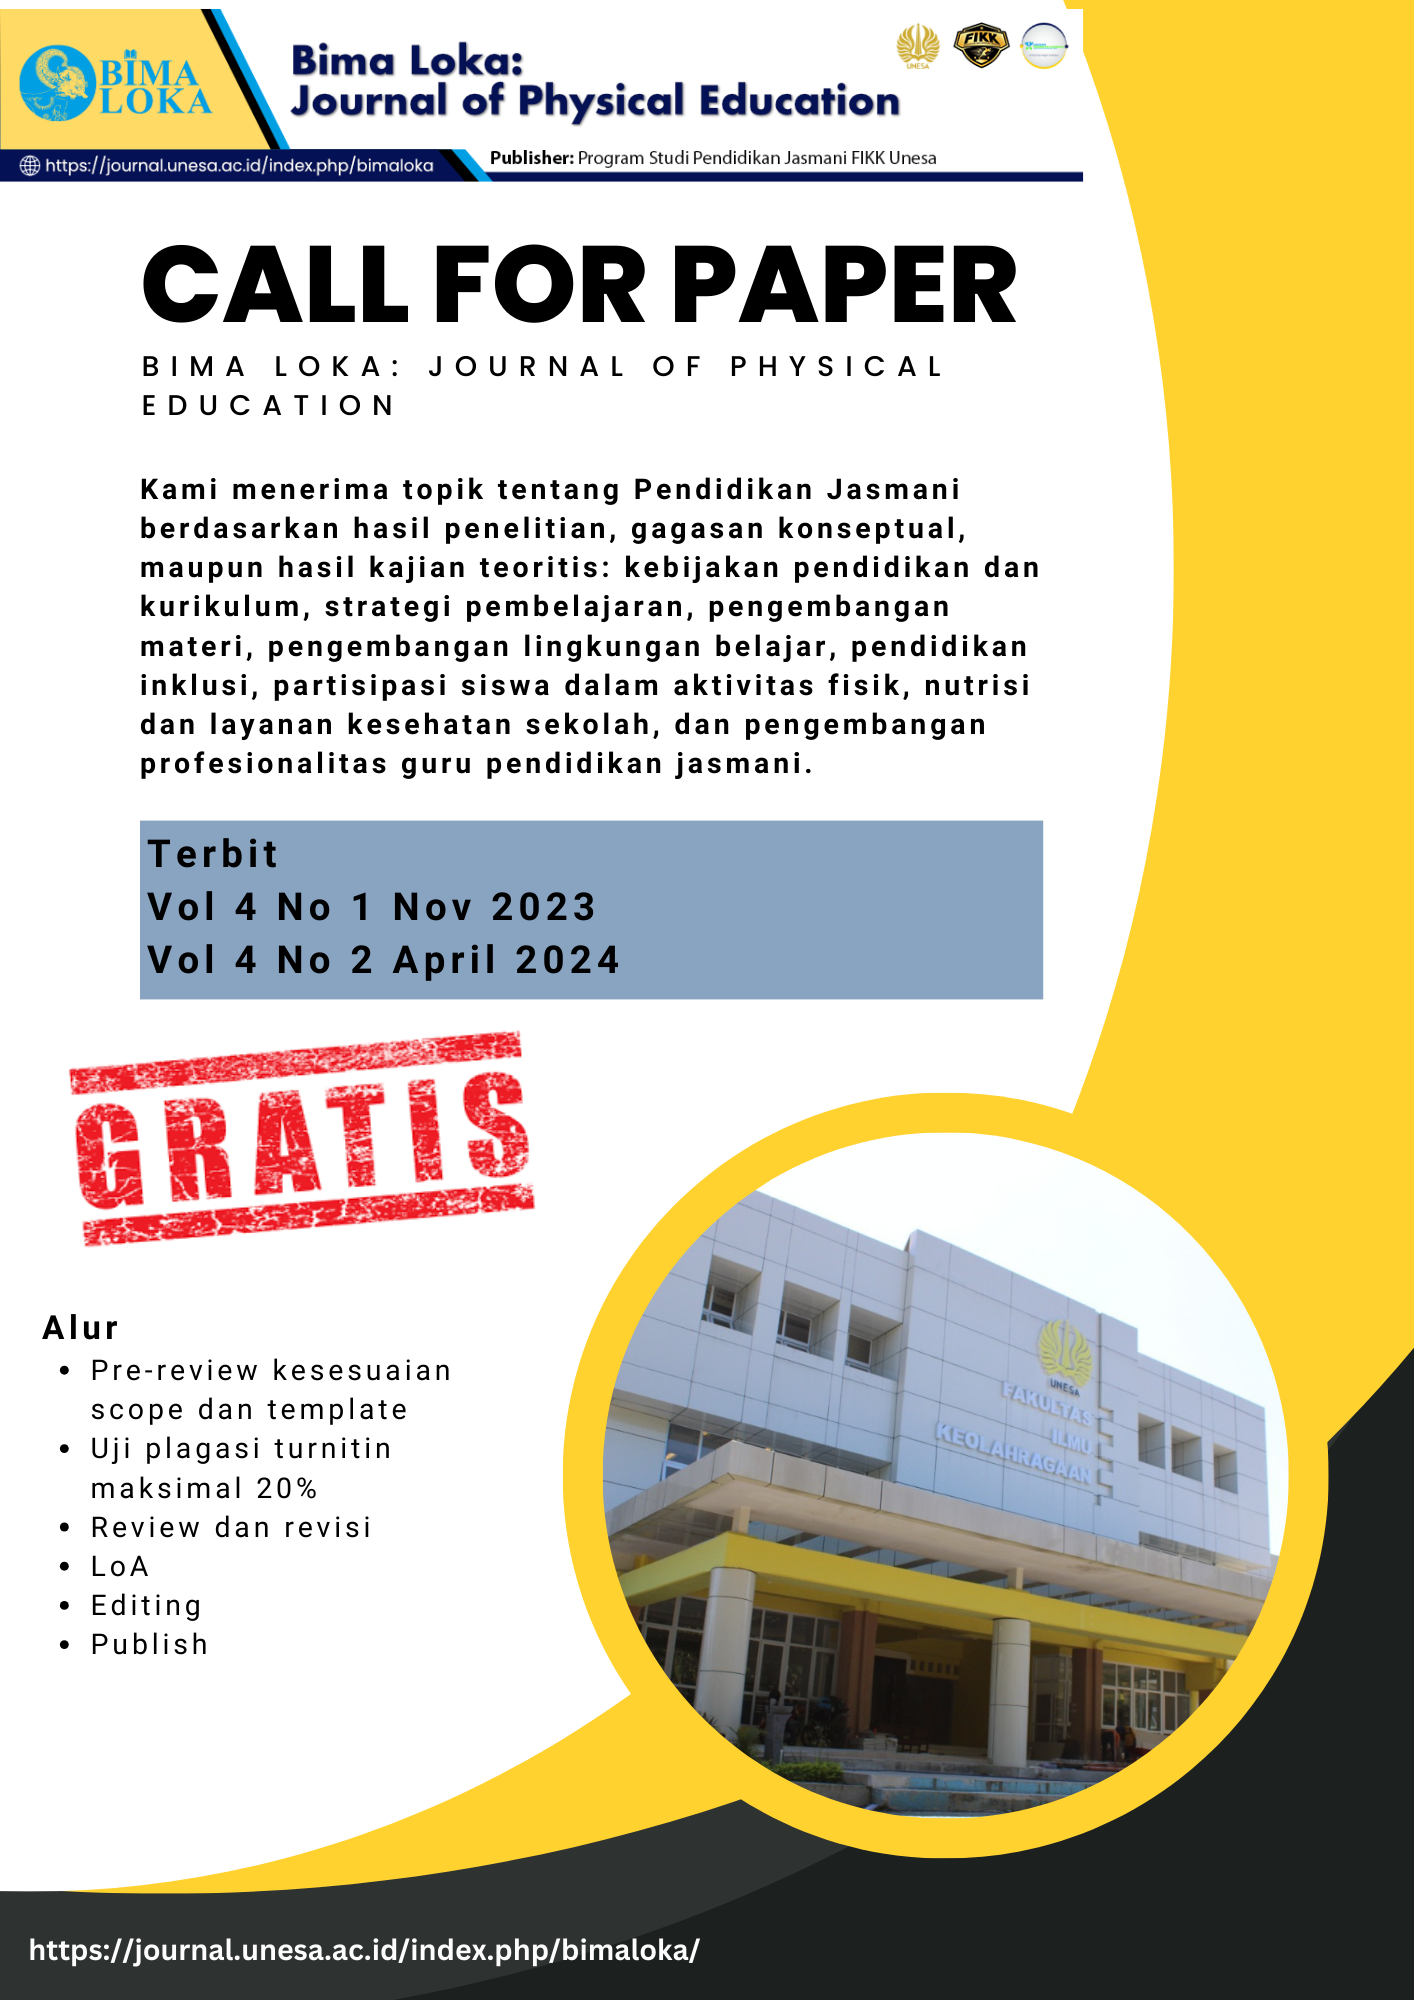 Call for Paper Vol 4